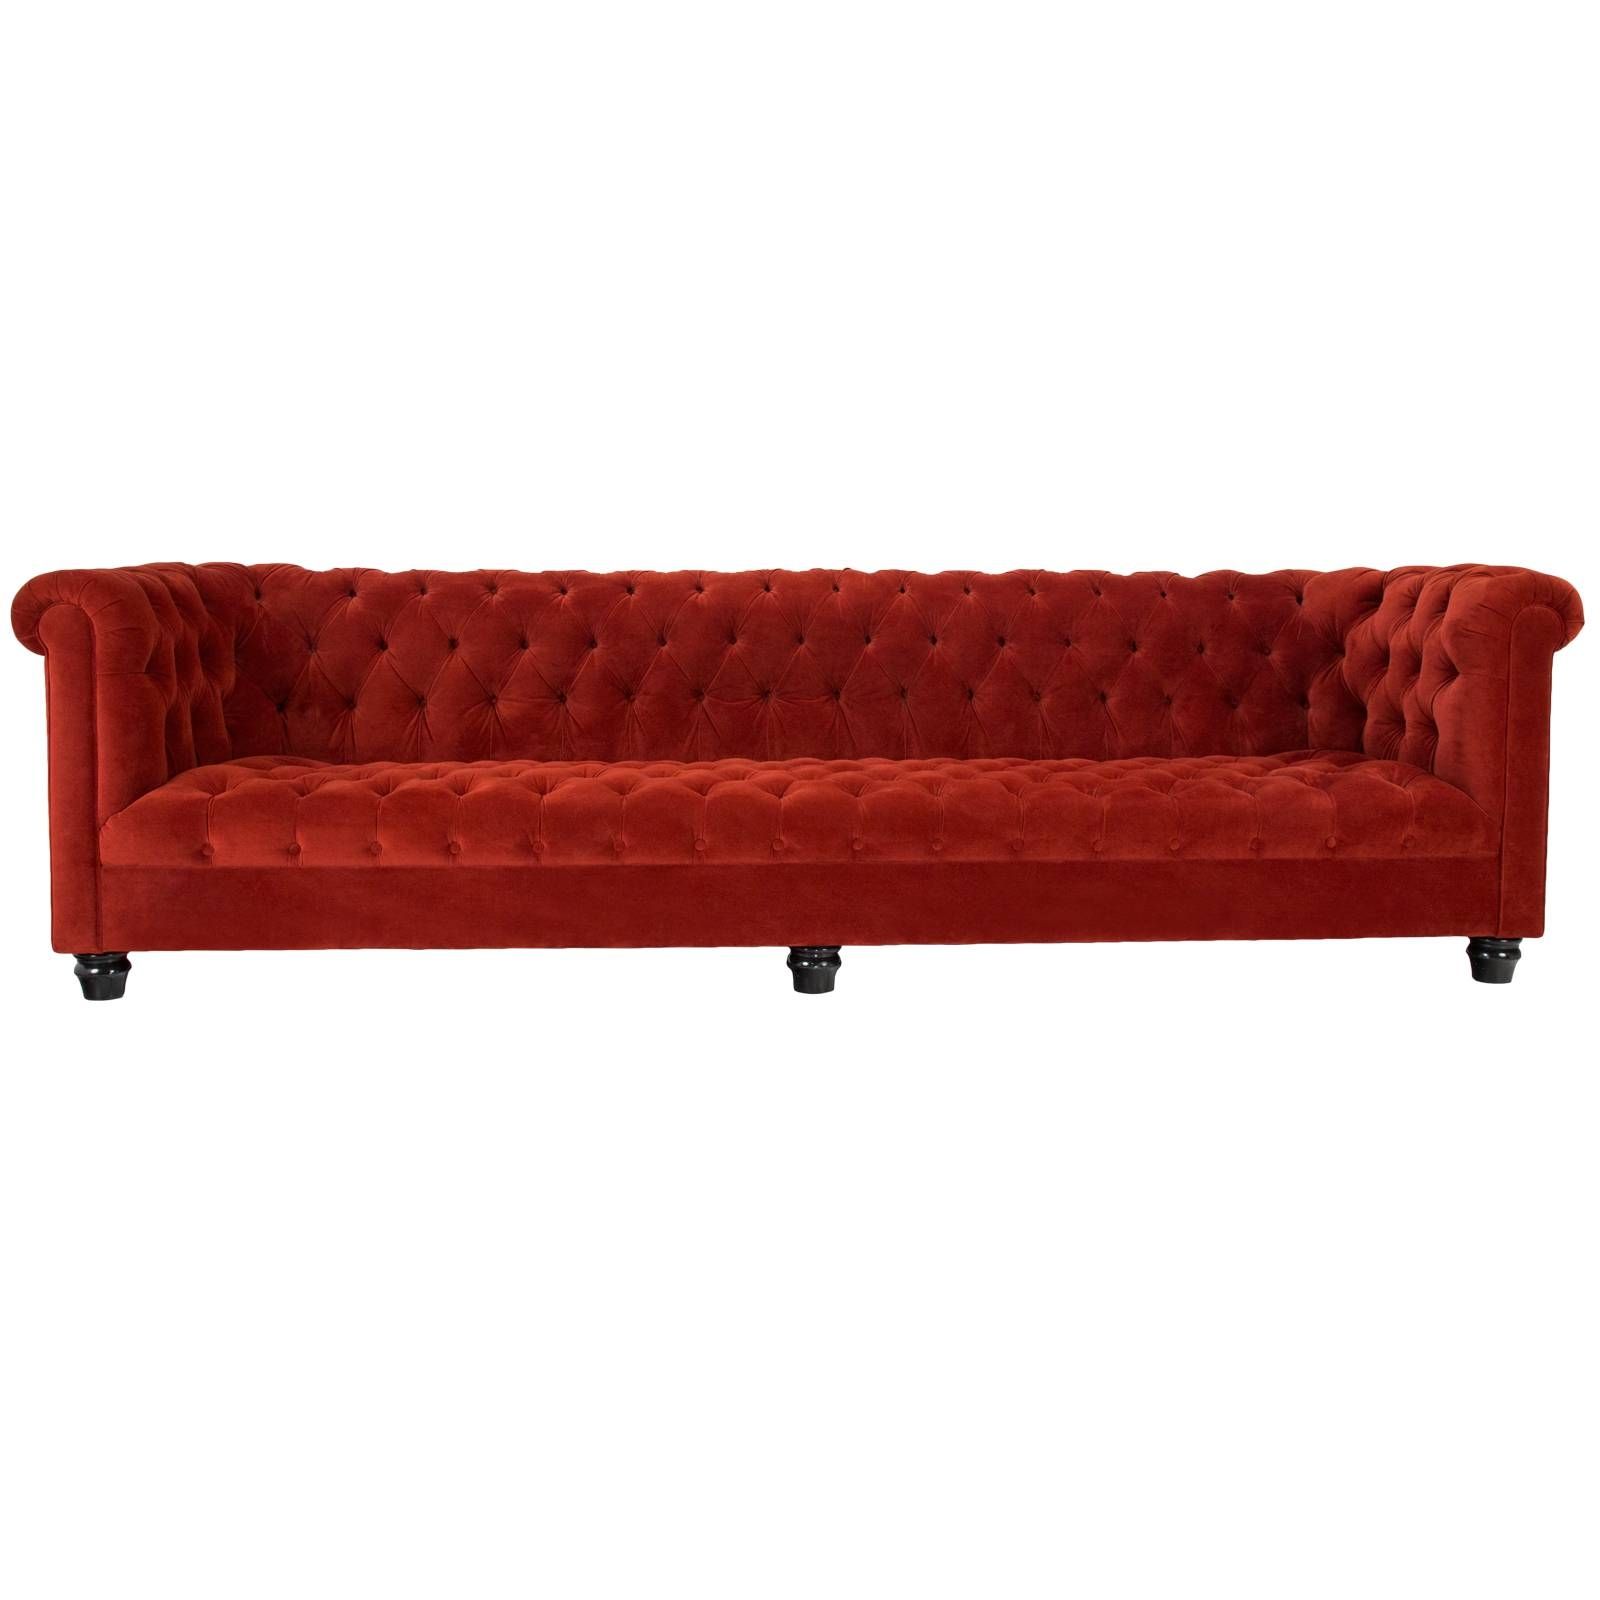 Tufted Sofa Rentals | Event Furniture Rental With Regard To Manchester Sofas (View 10 of 30)